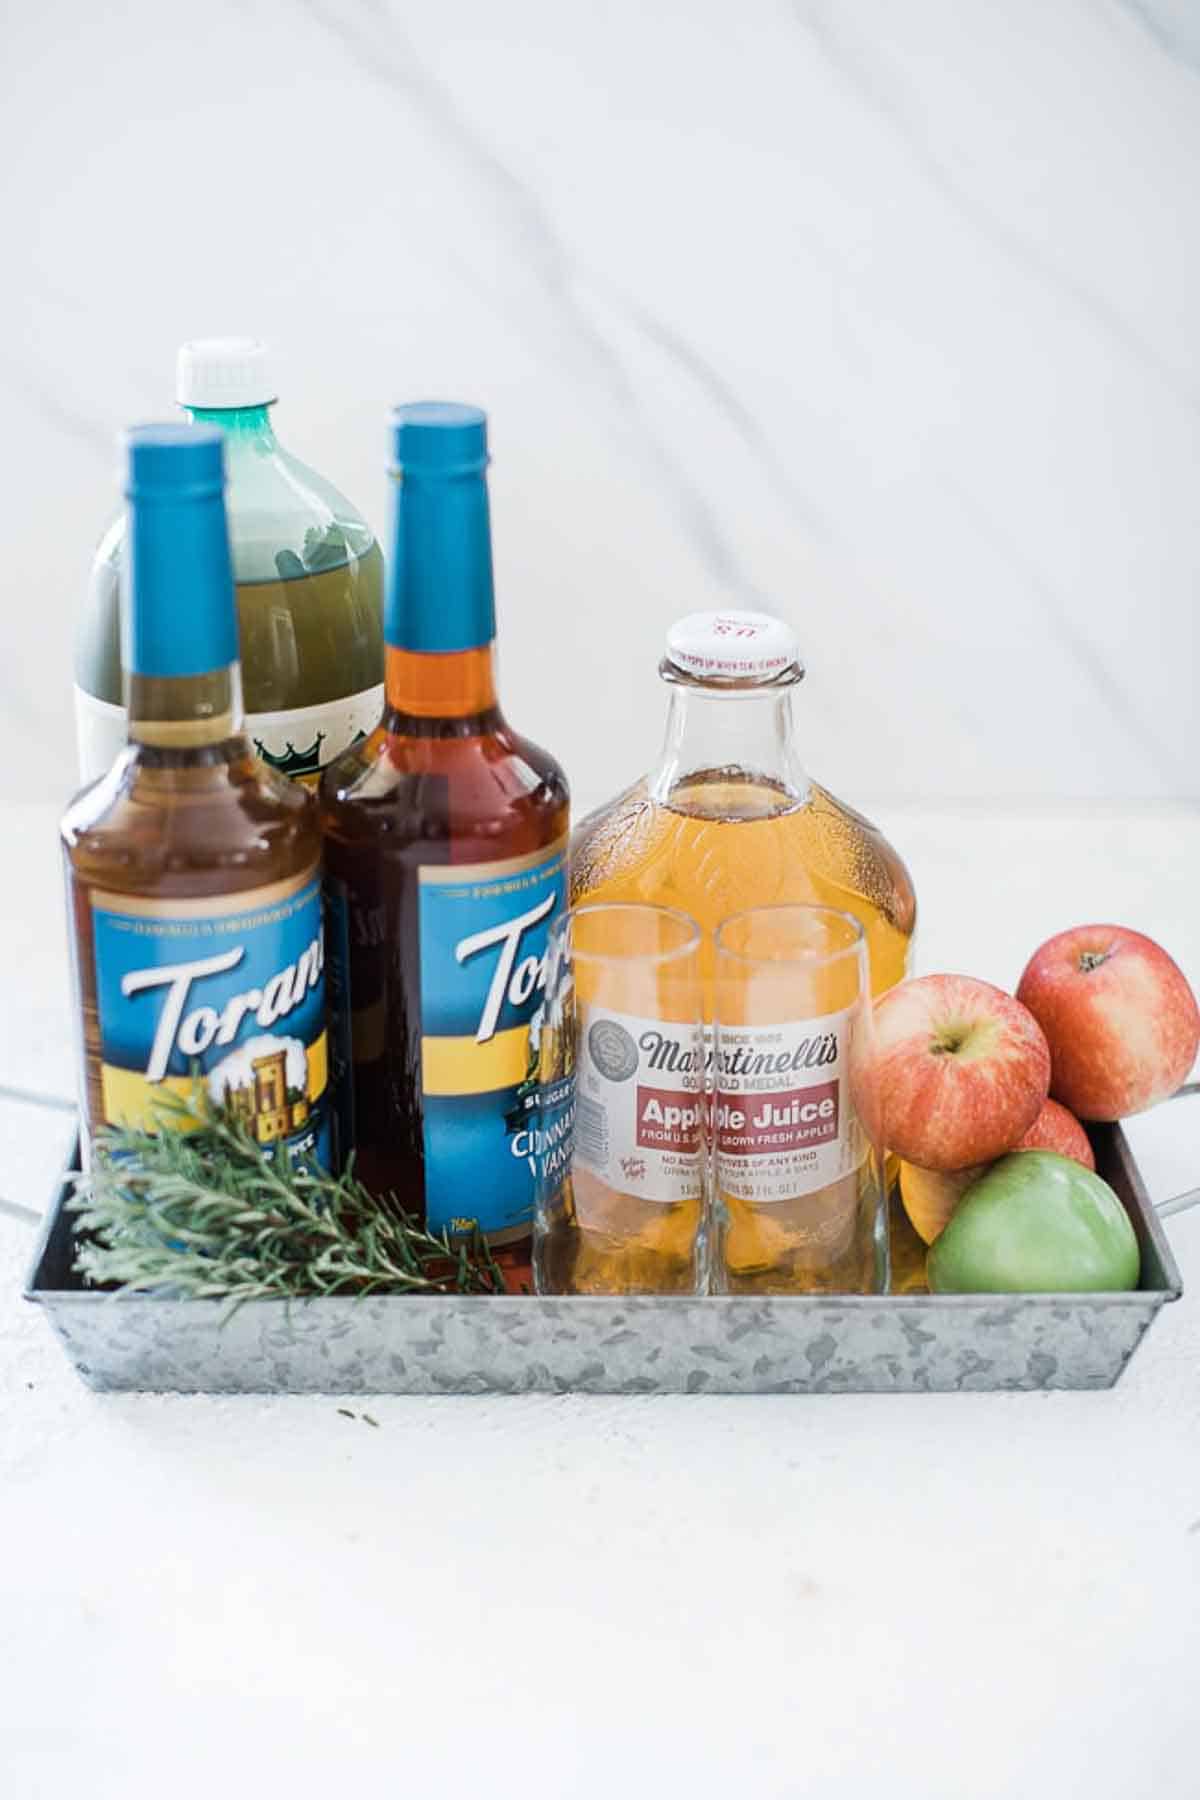 Flavored syrups, apple juice, ginger ale and apples in a metal tray.